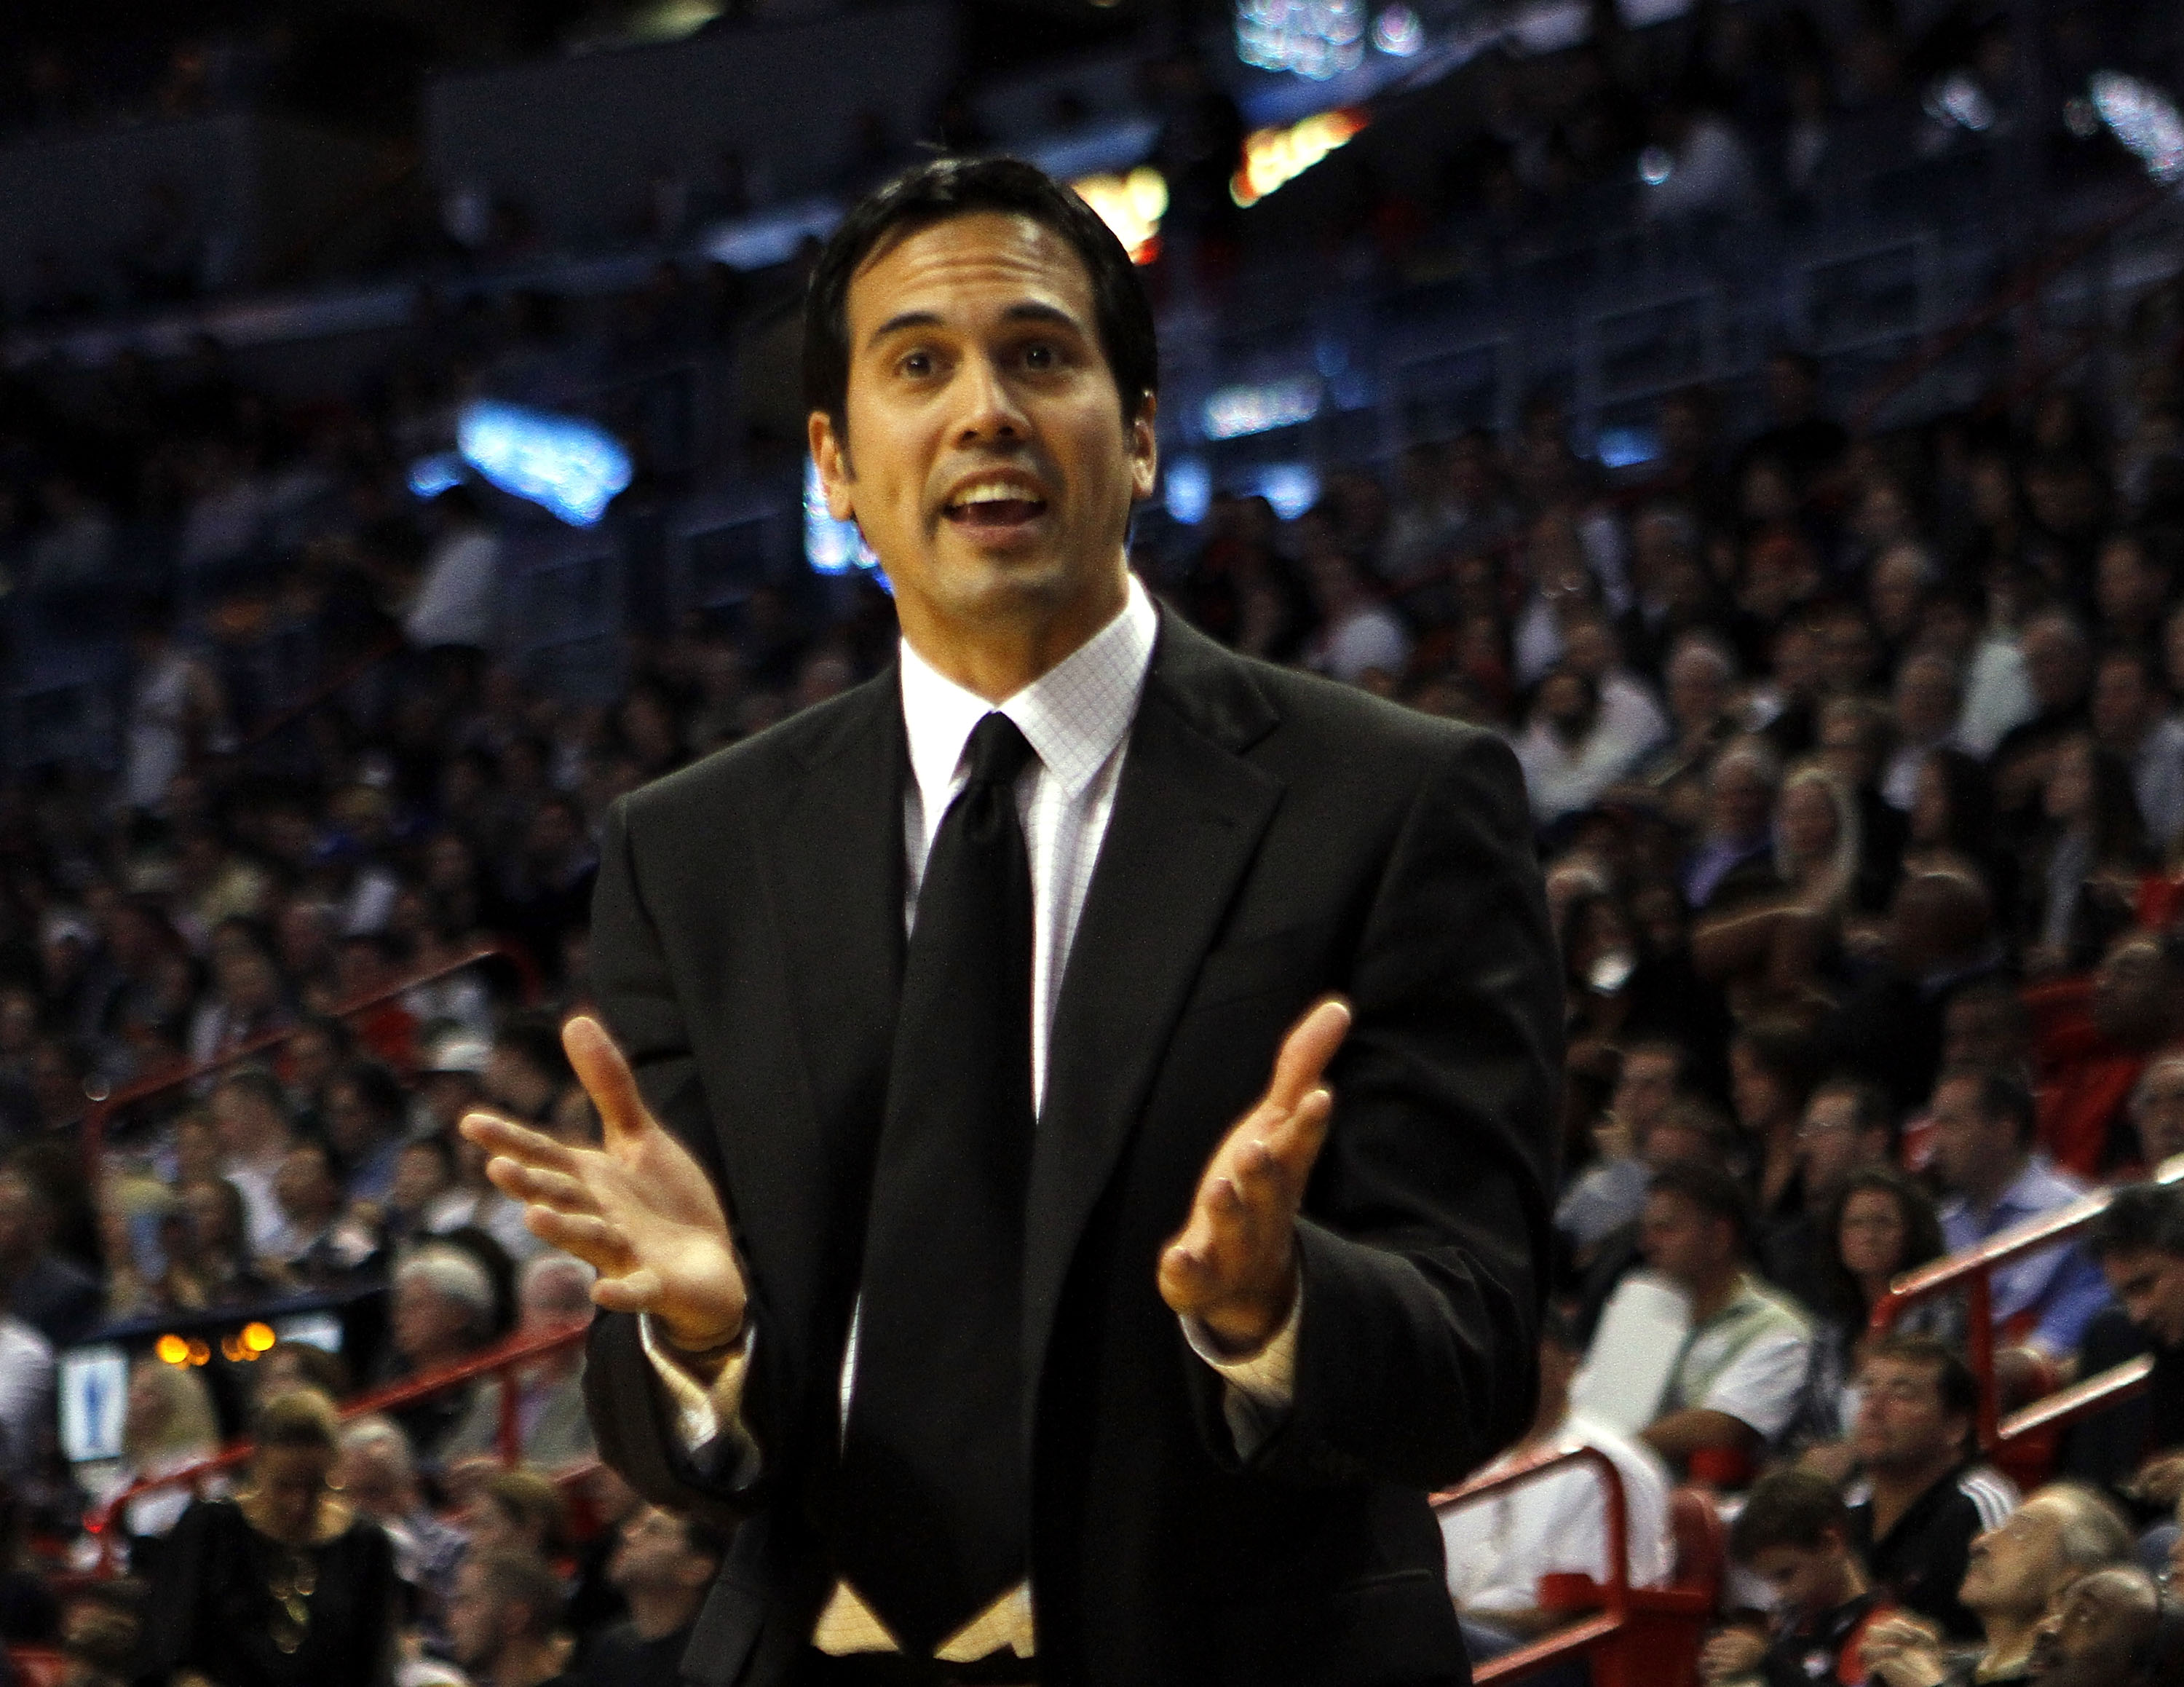 Miami Heat - Congratulations to Miami HEAT Head Coach Erik Spoelstra on  recording his 200th career win last night! Coach Spo joins Pat Riley as the  only other head coach in franchise